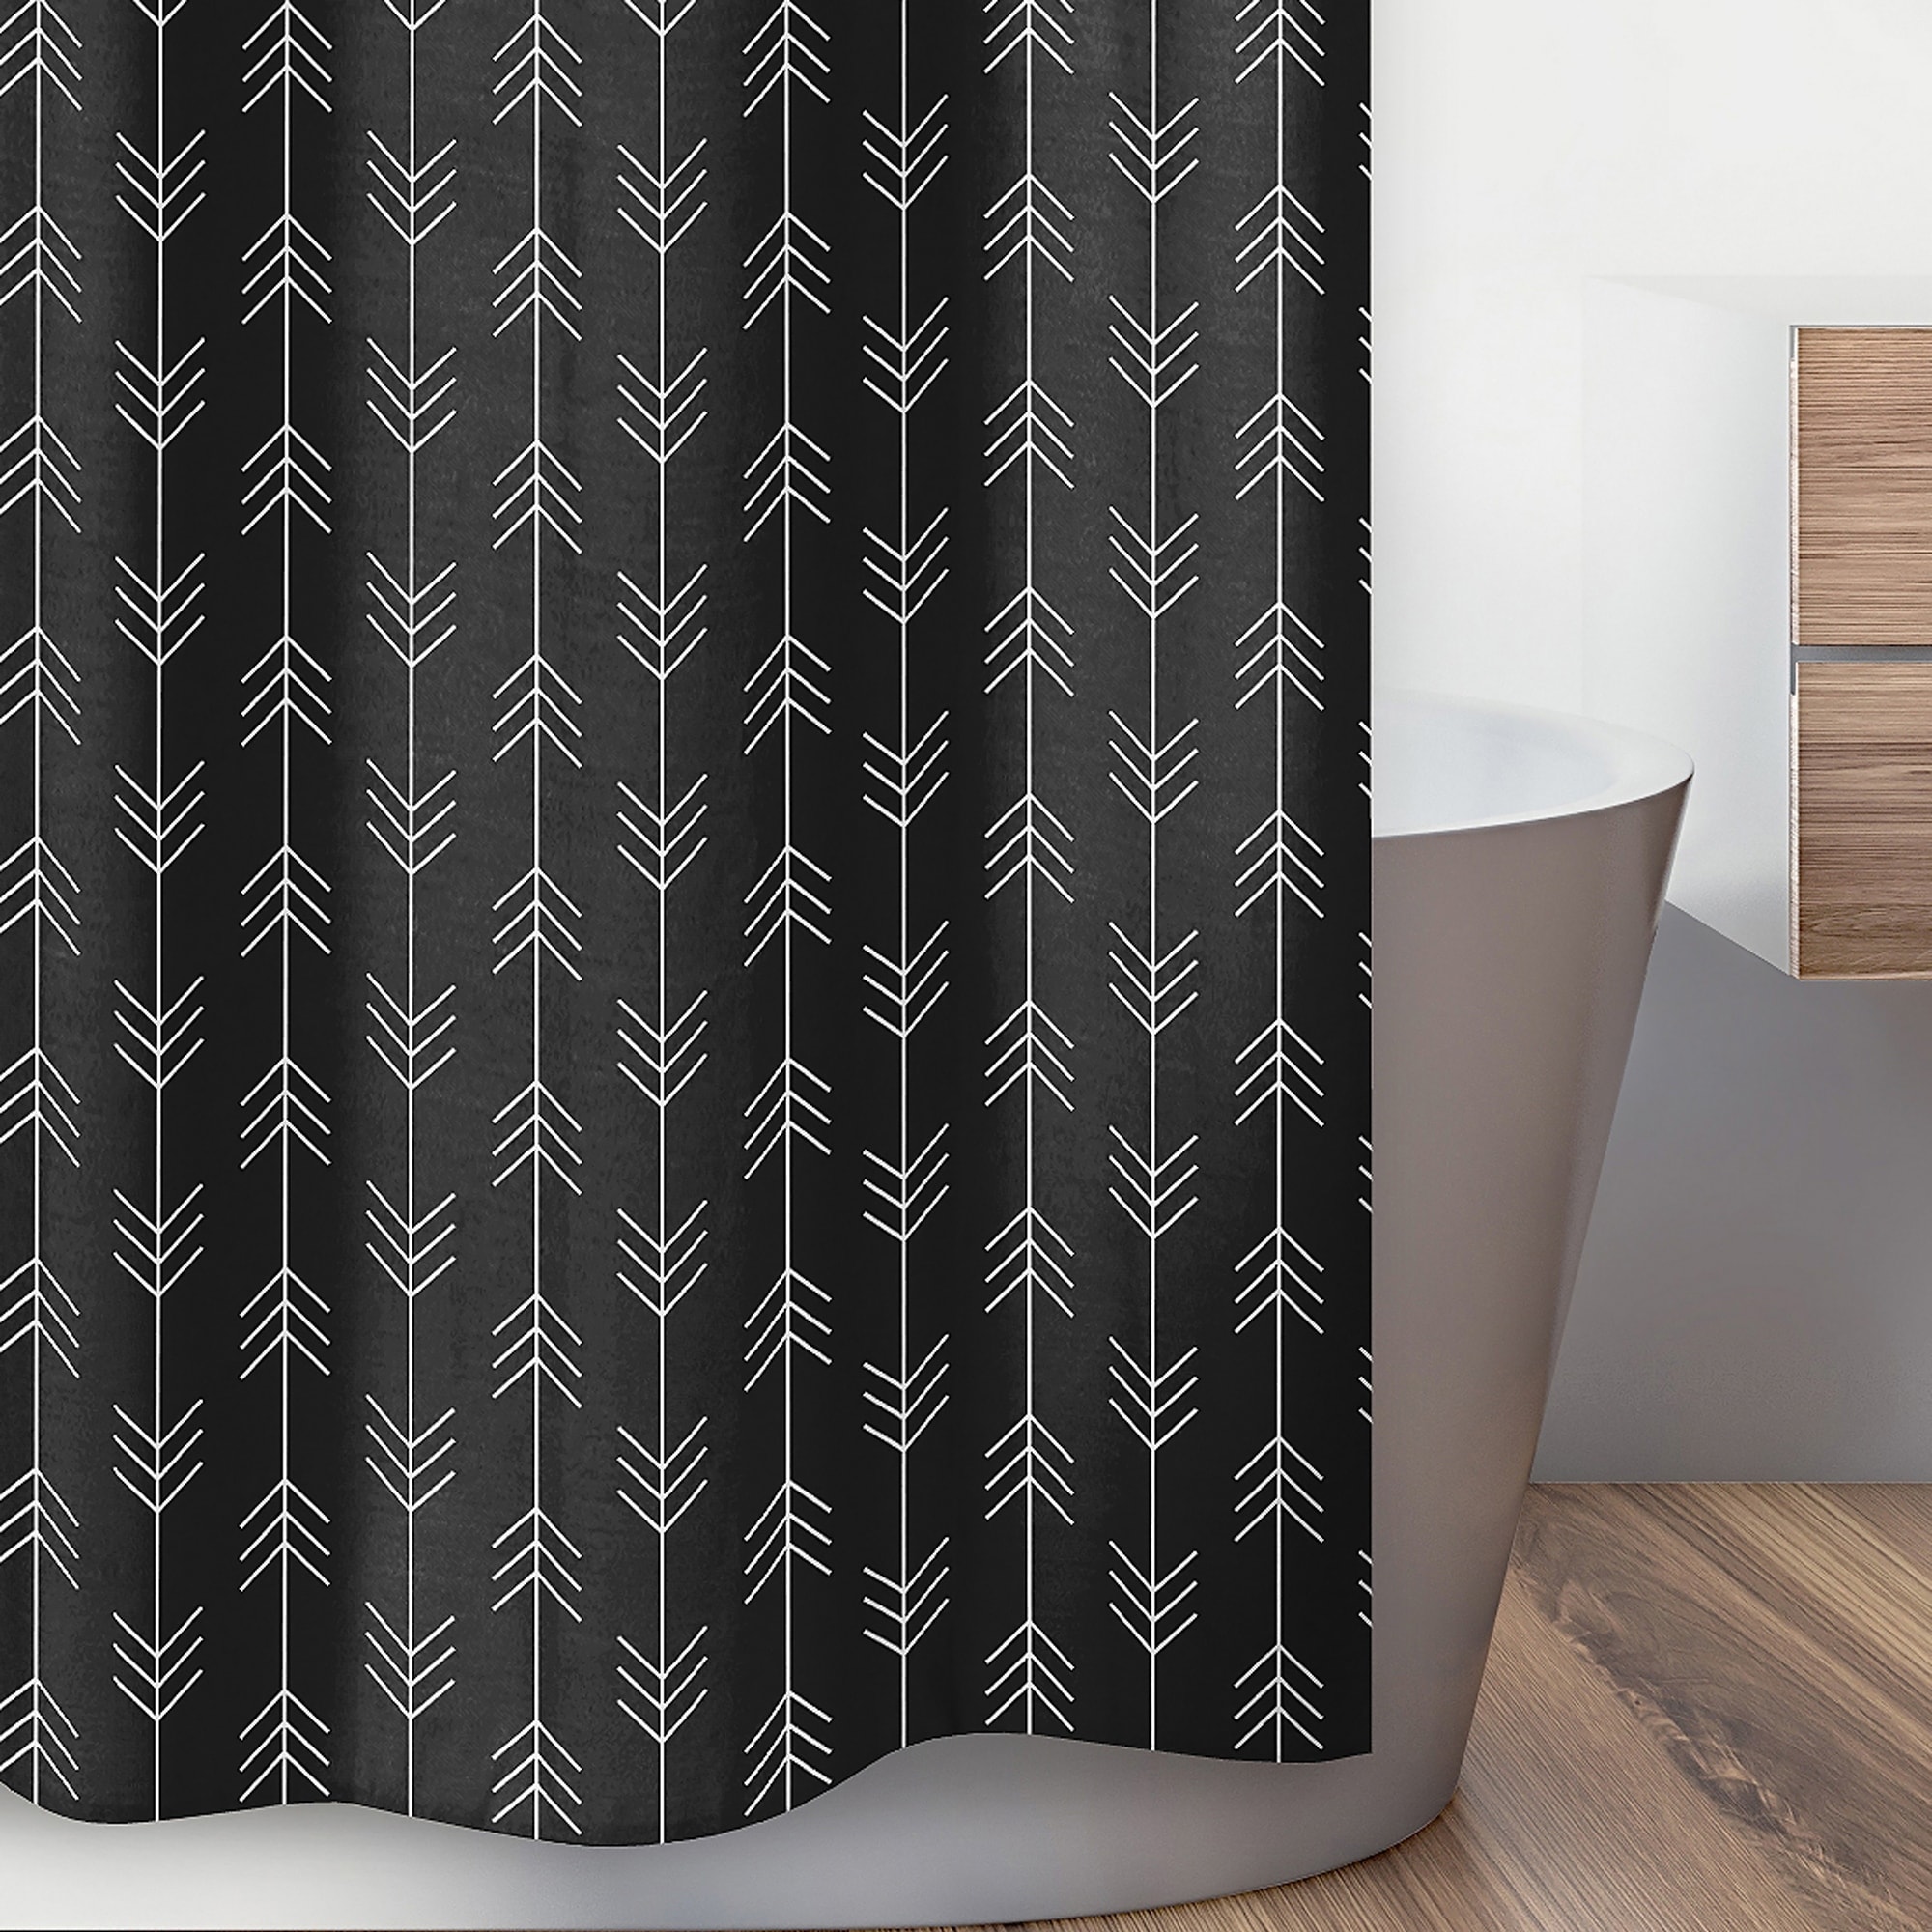 Details about   Black White Shower Curtain Woods Bullfinches Print for Bathroom 